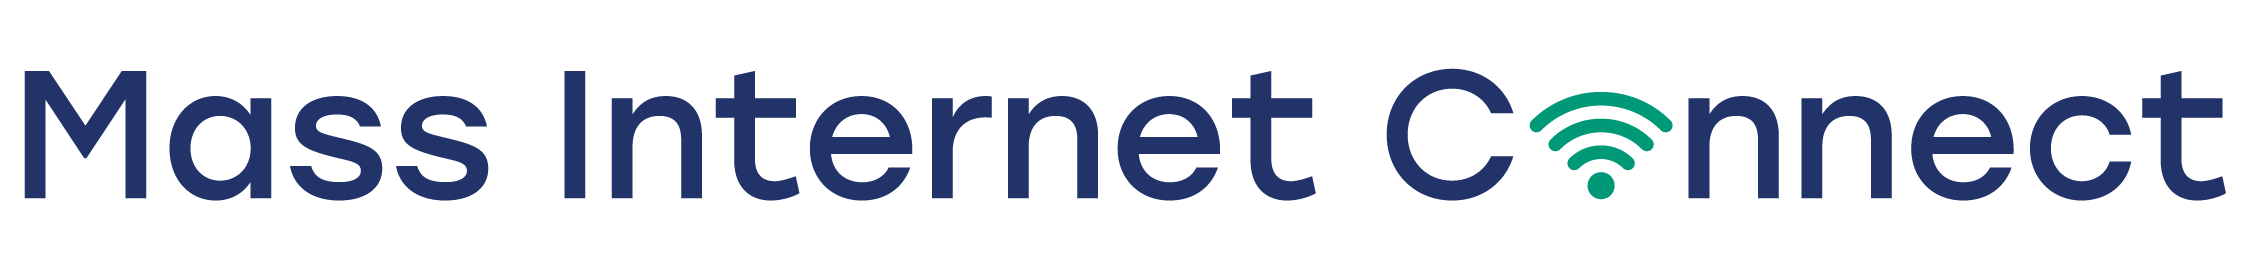 logo for Mass Internet Connect